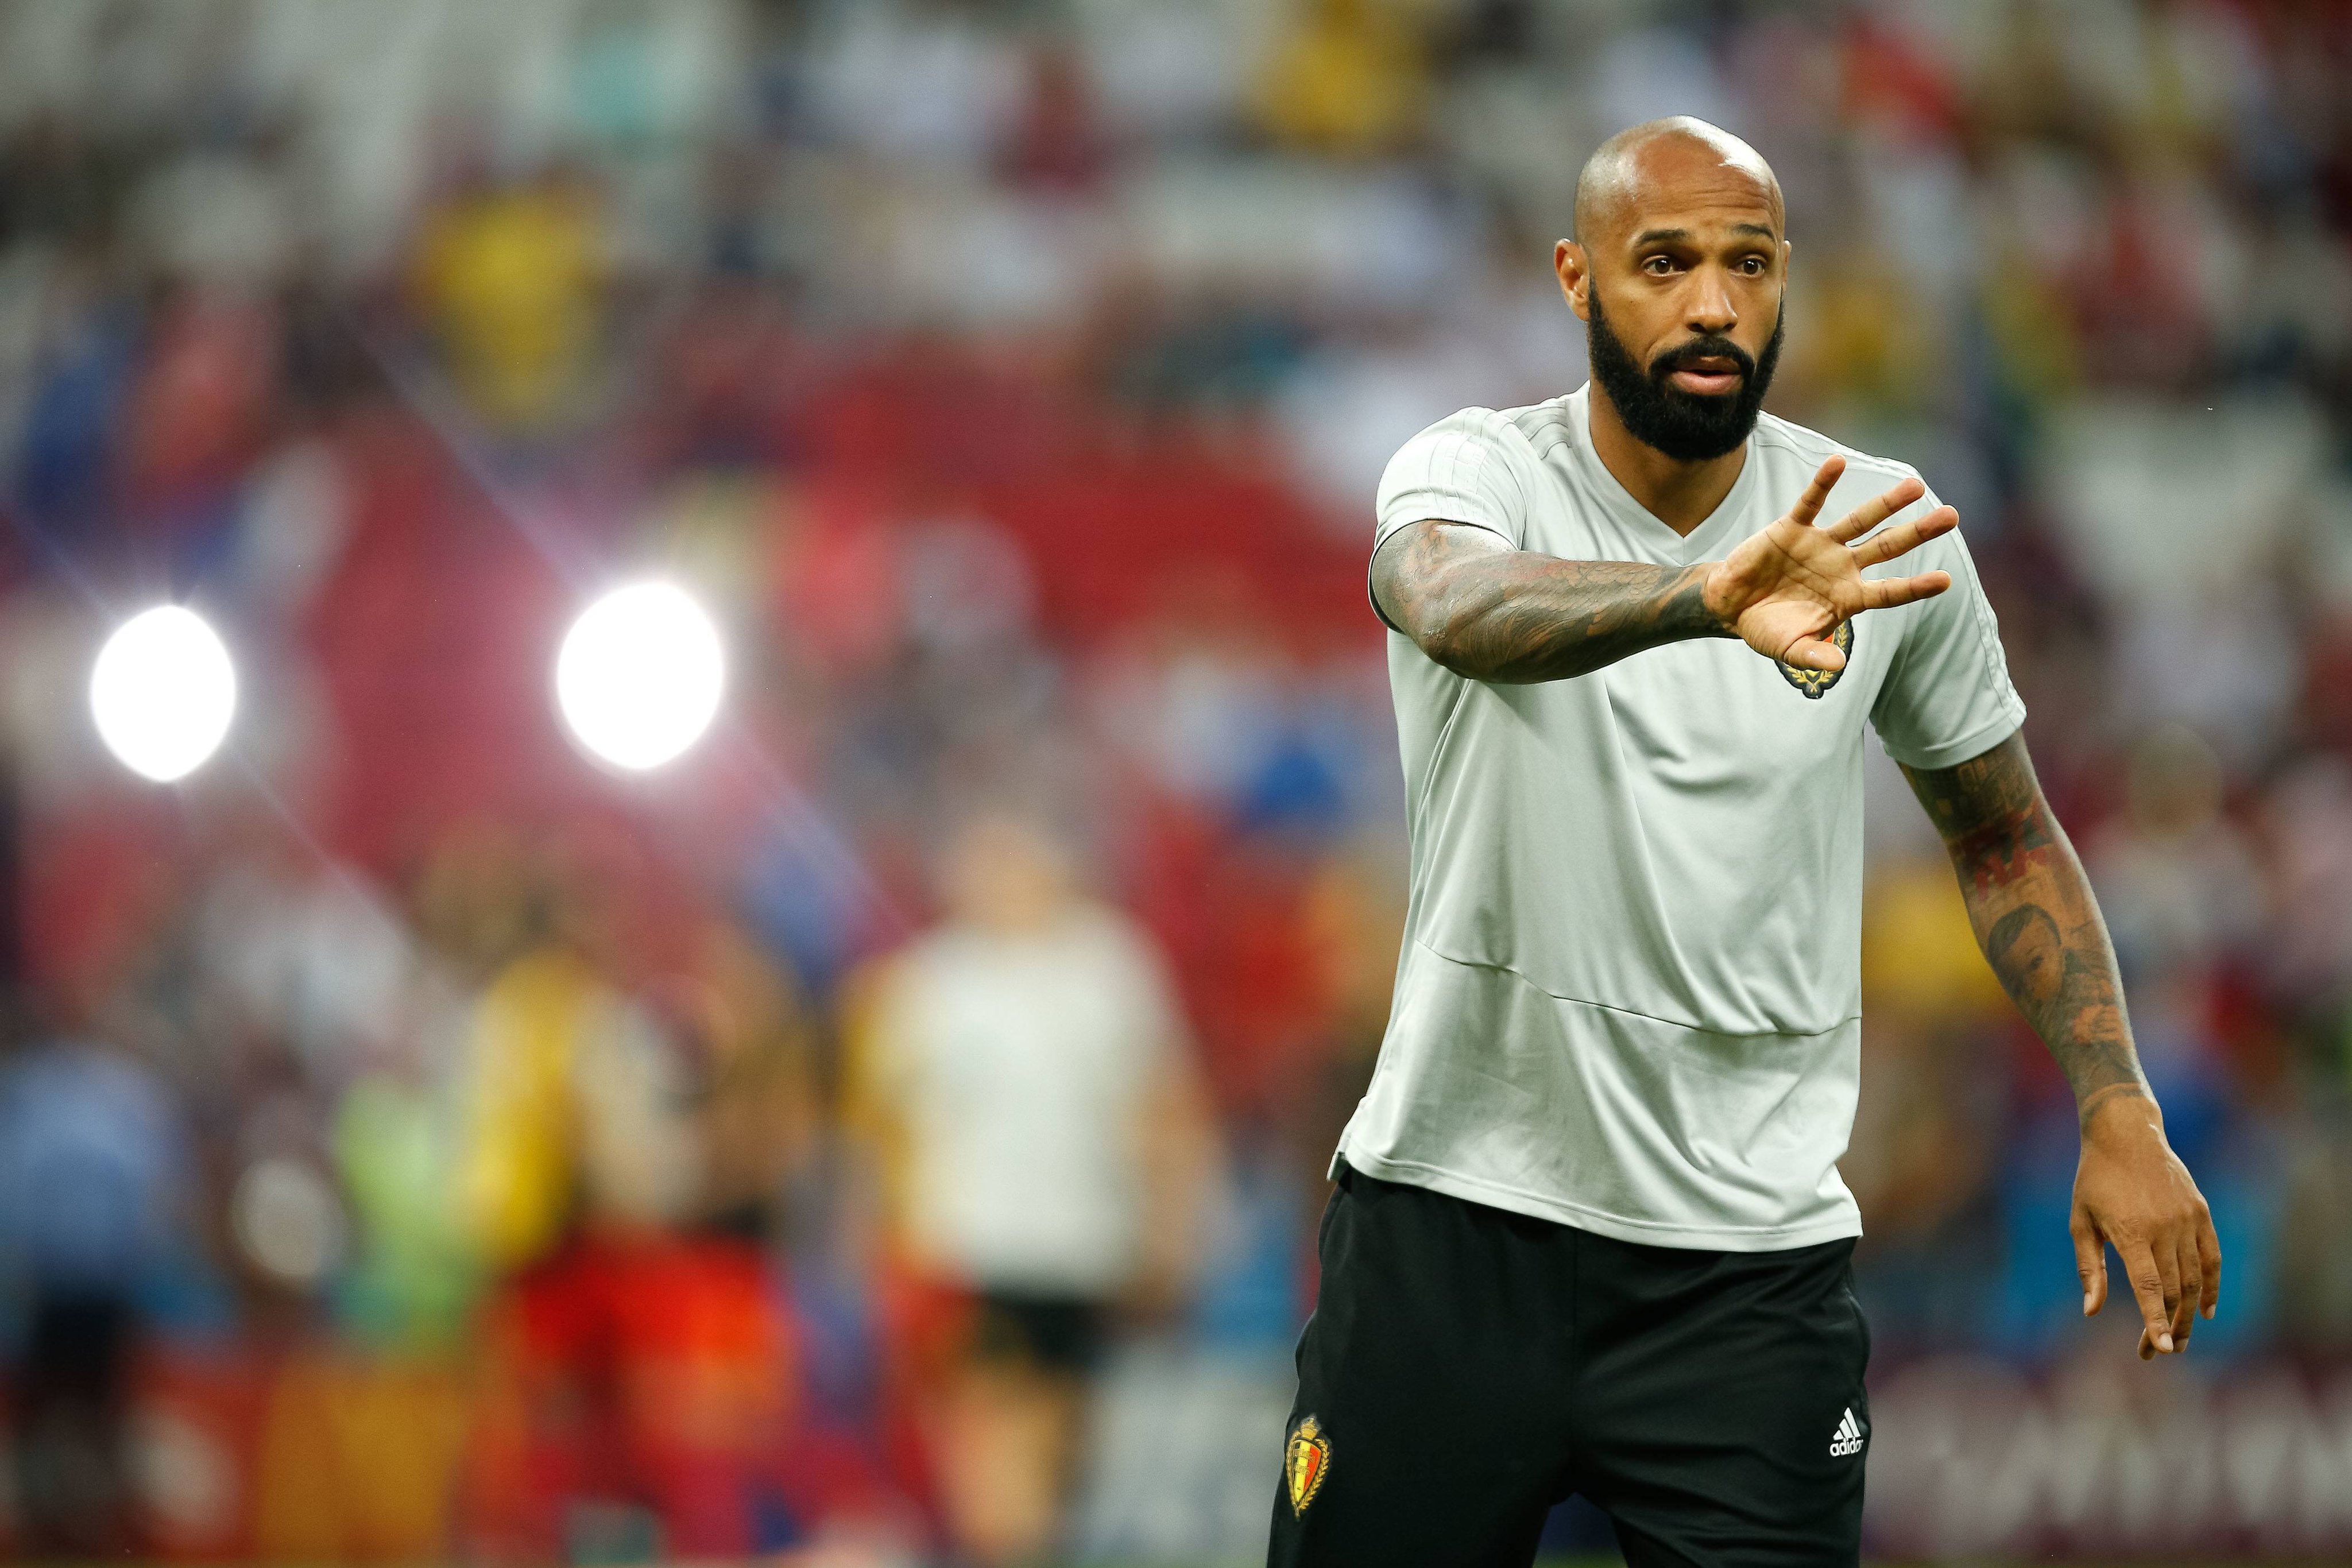 Thierry Henry rejoins Belgium as an assistant coach for postponed Euro 2020